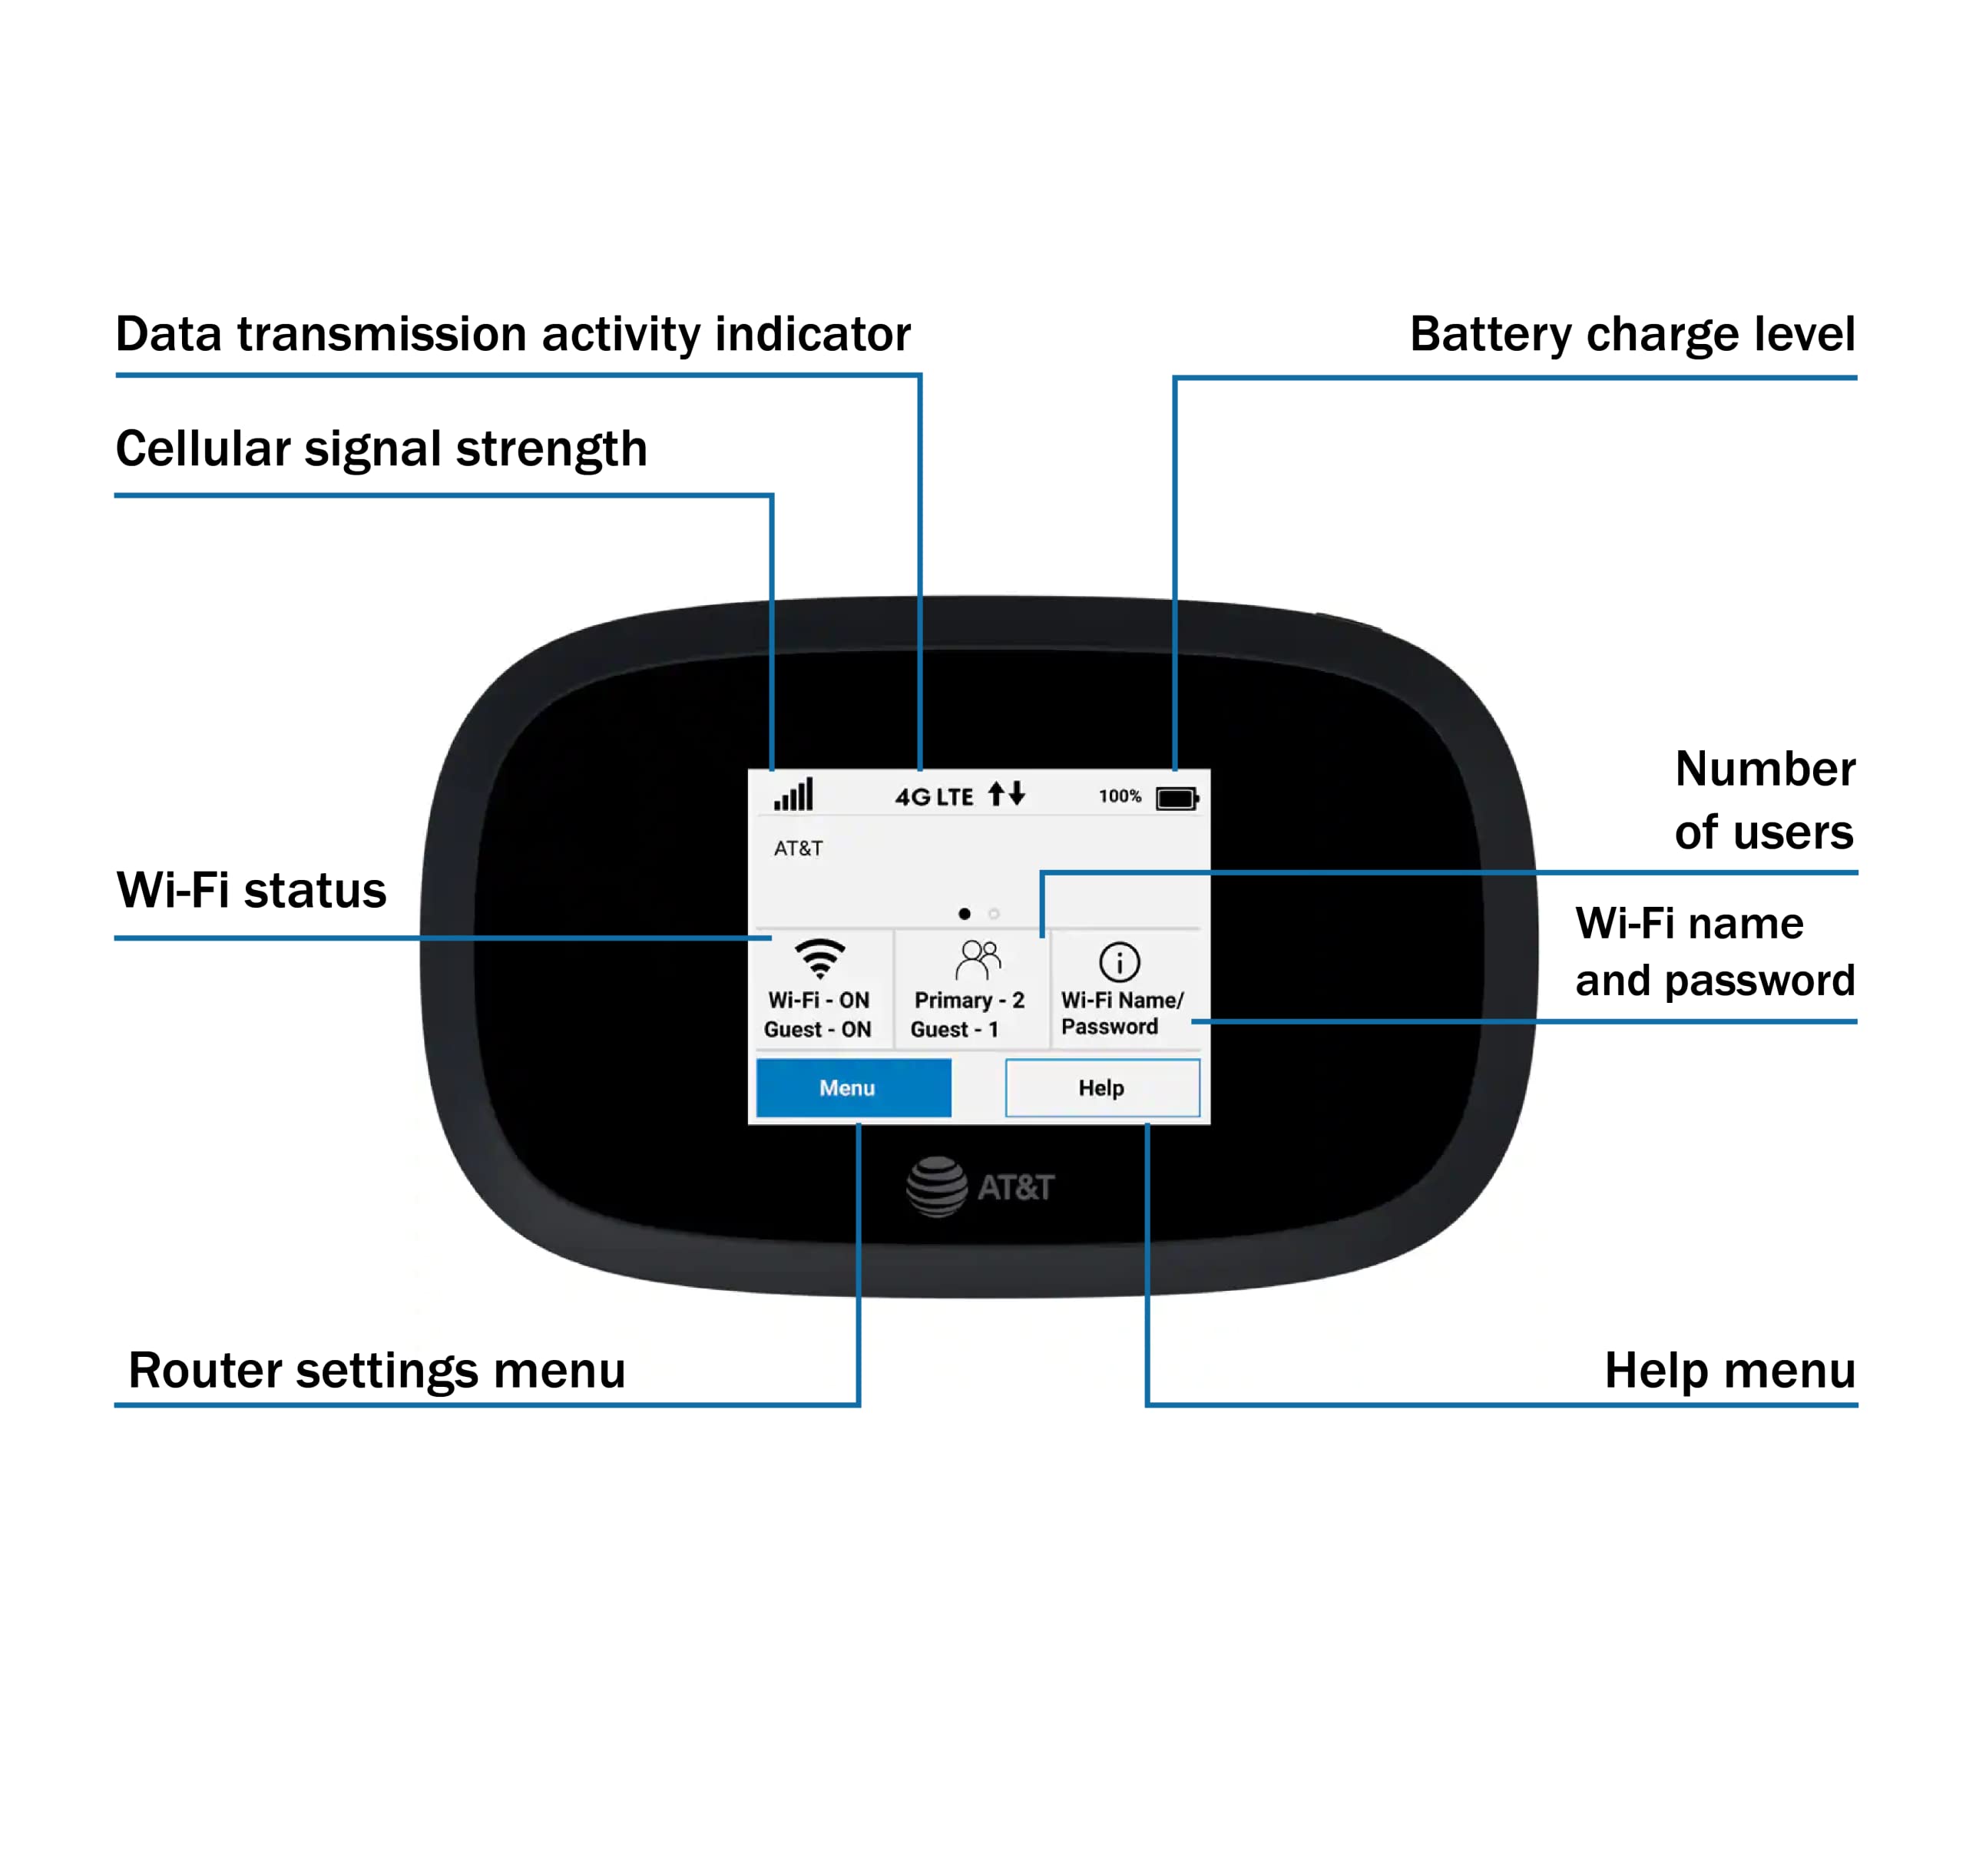 AT&T Wireless Hotspot WiFi Device 4G LTE MiFi 8000 | Global 4G Cat18 LTE | Up to 1 Gbps | EVDO-LINK Bundle for Mobile Hotspot Device | with SIM Card and Extra Battery